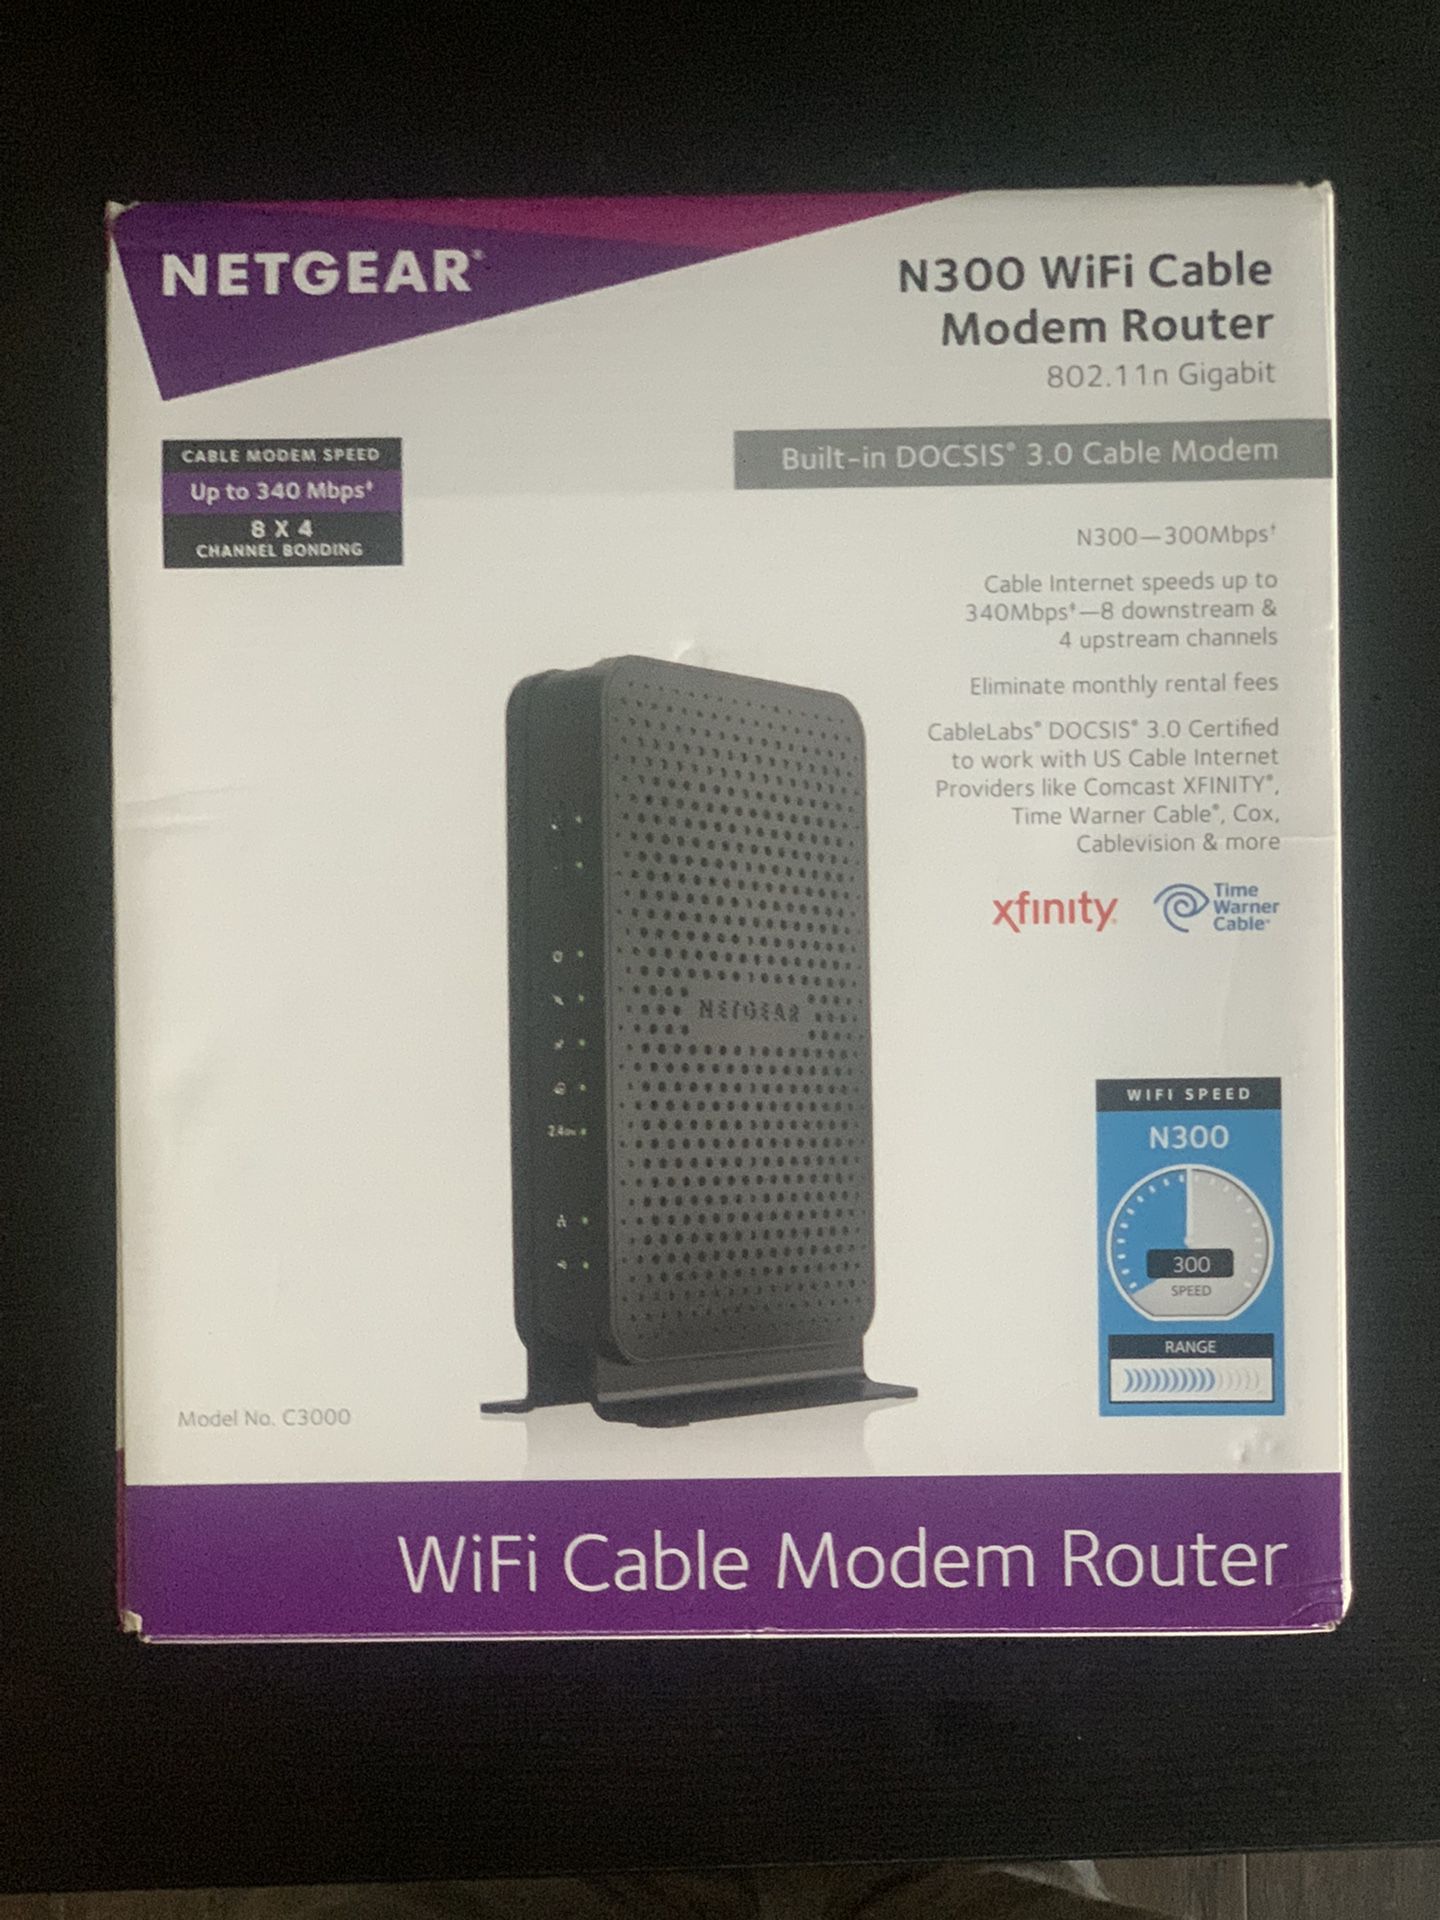 Netgear N300 Wi-Fi Cable Modem Router